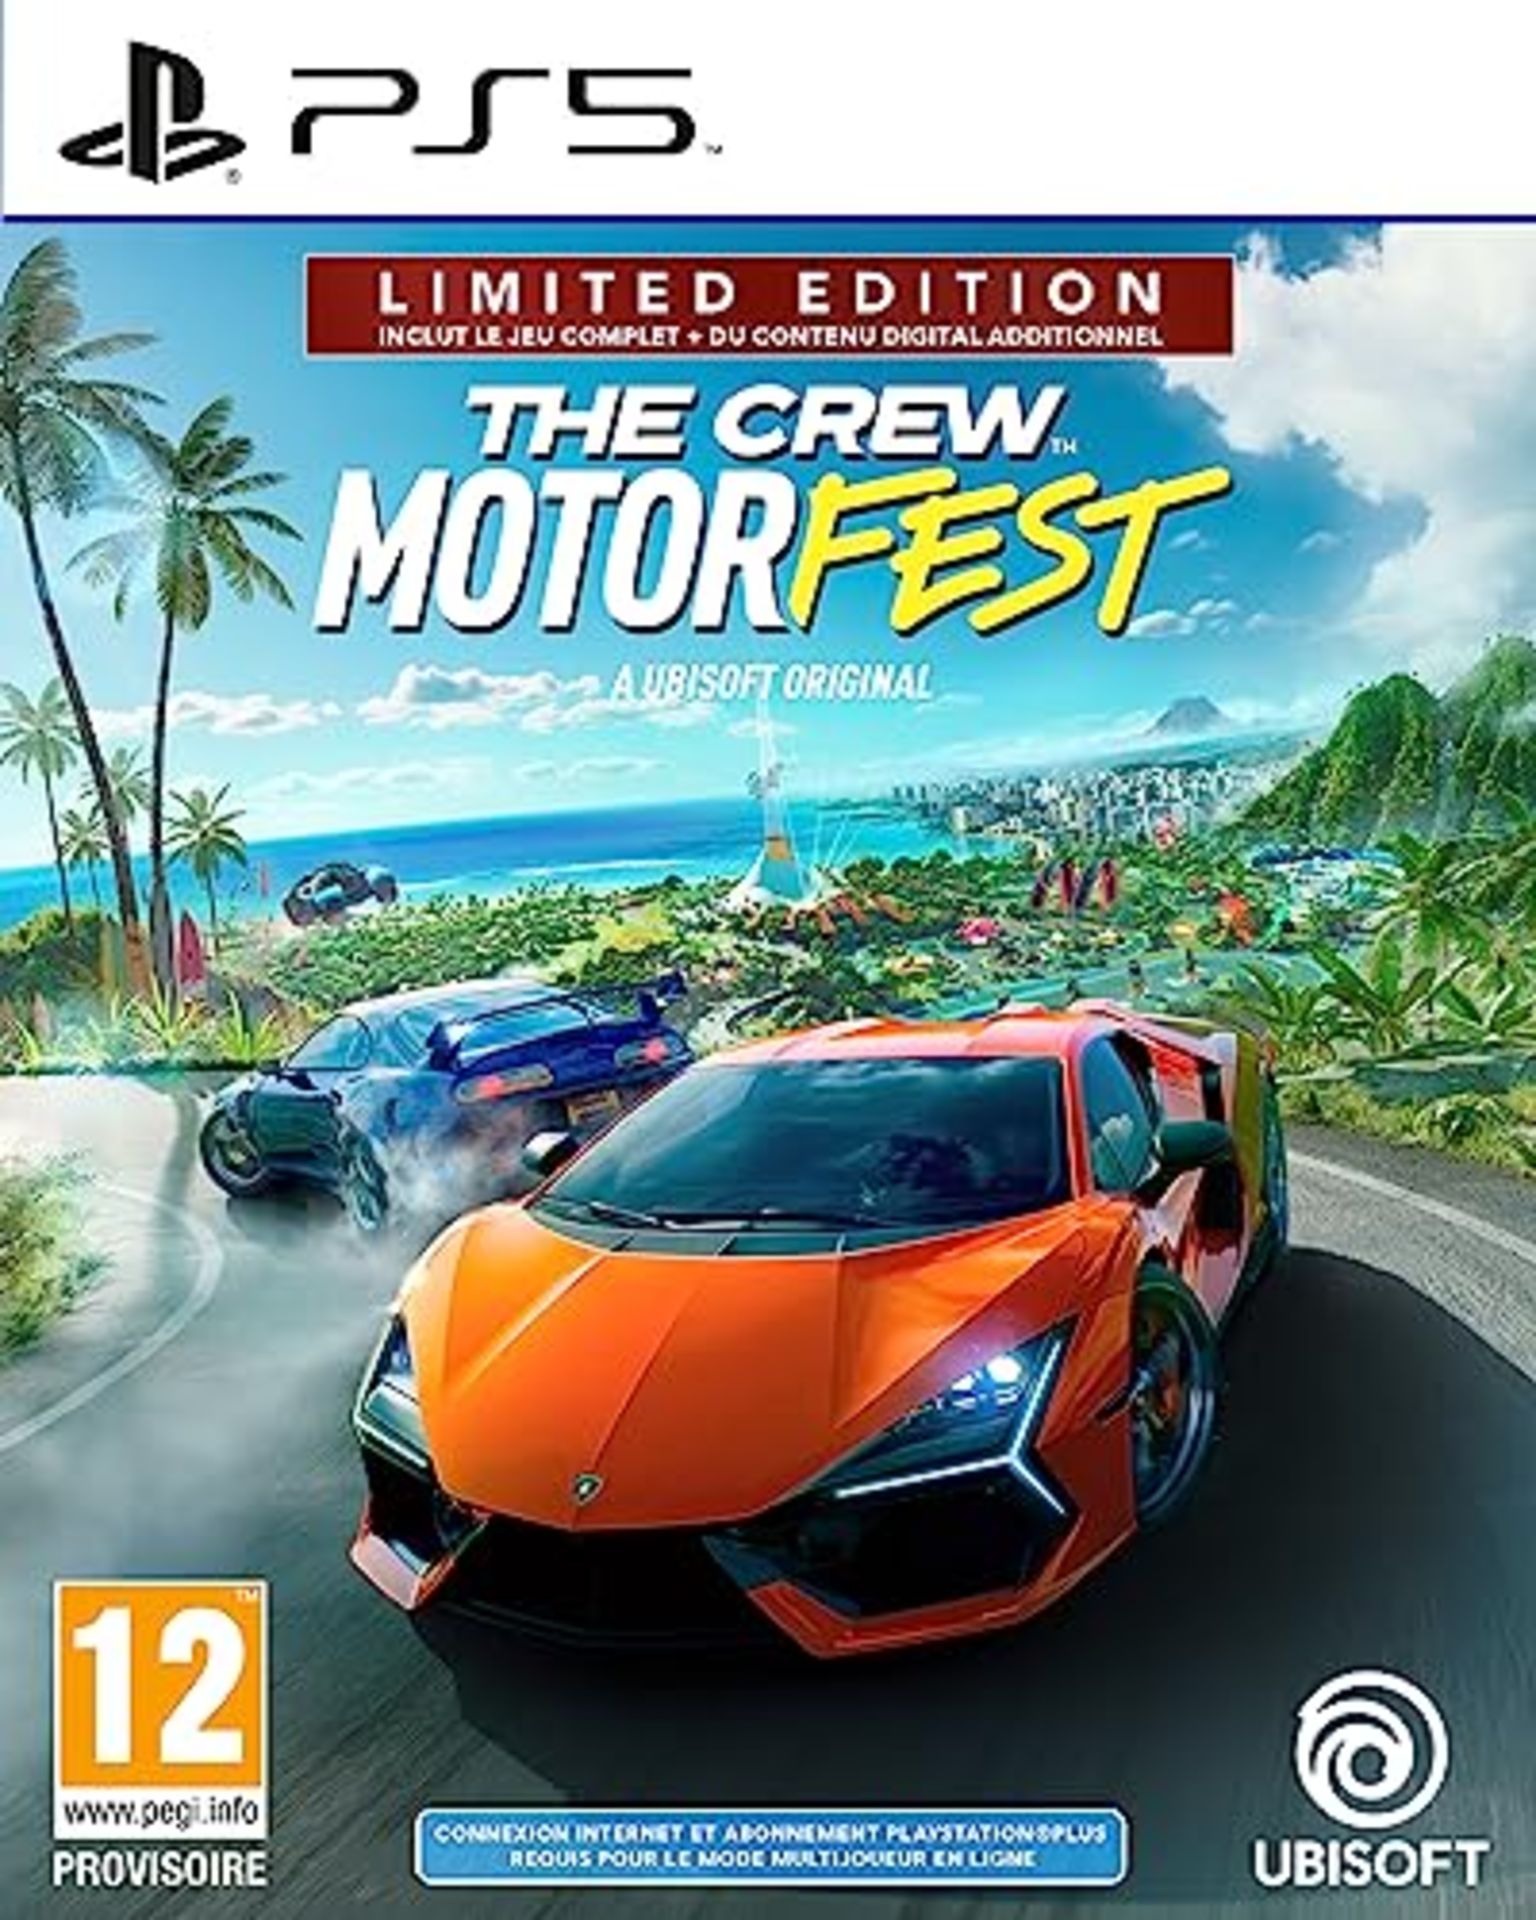 The Crew Motorfest Limited Edition for PS5 - Image 4 of 6